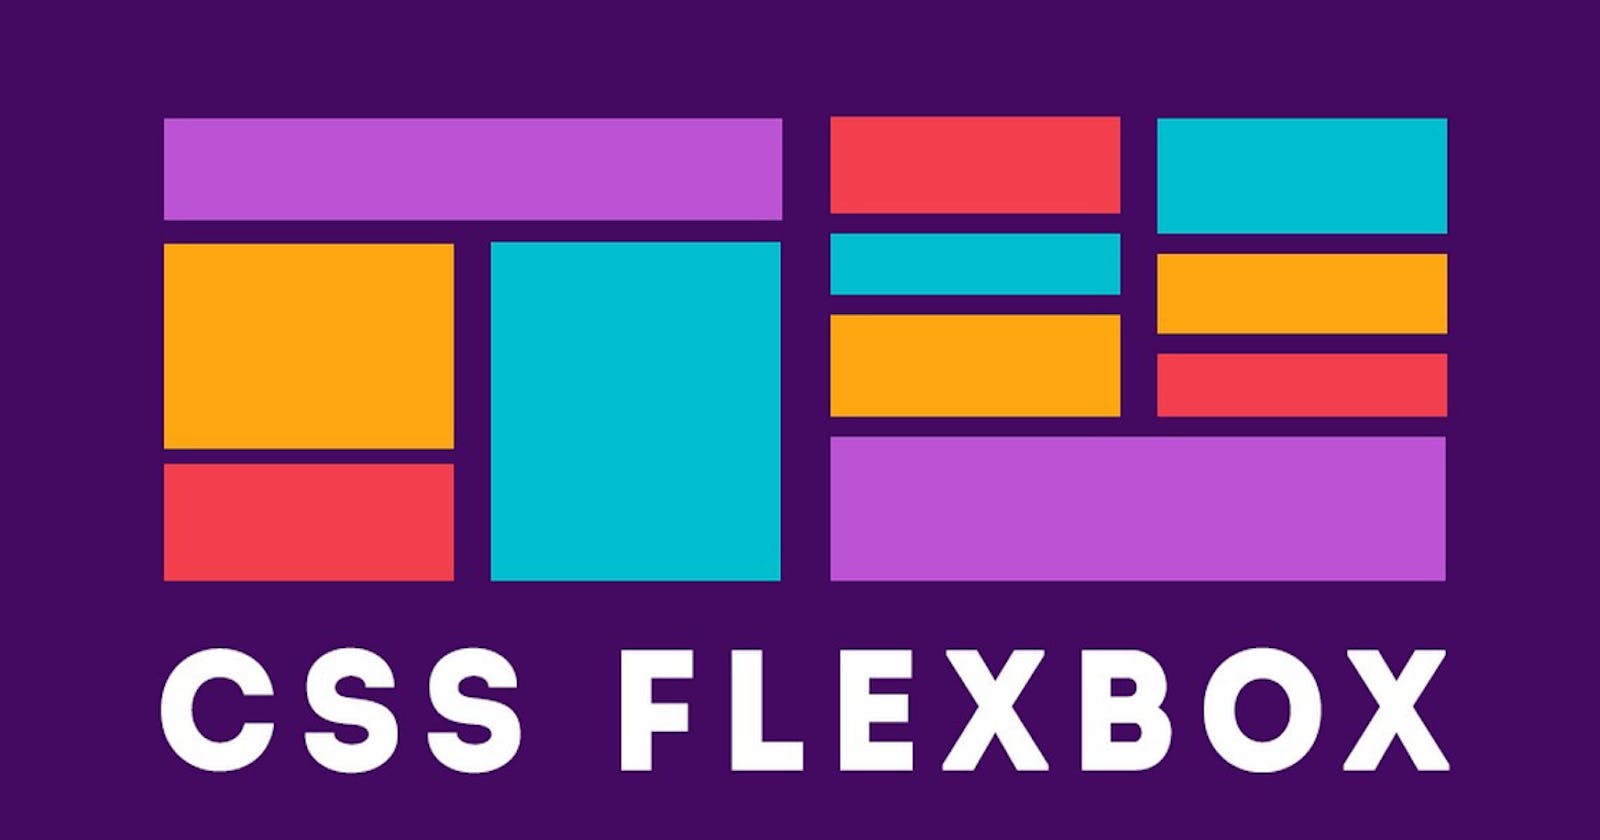 All About CSS FlexBox